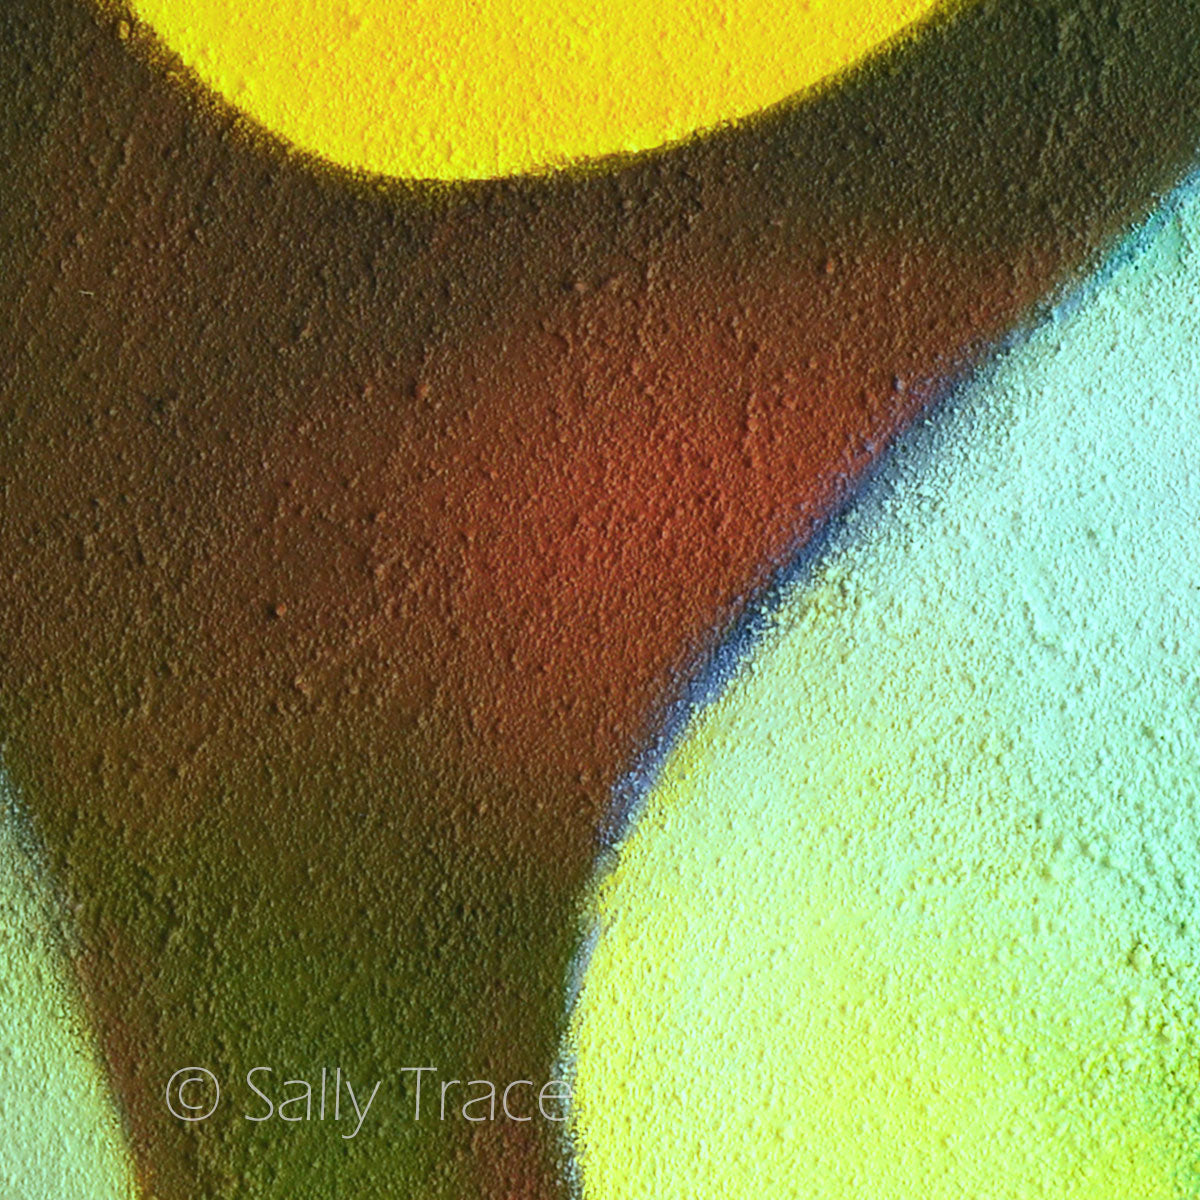 Geometric art prints from the original painting by Sally Trace, art prints on canvas, buy art directly from the artist, close-up view